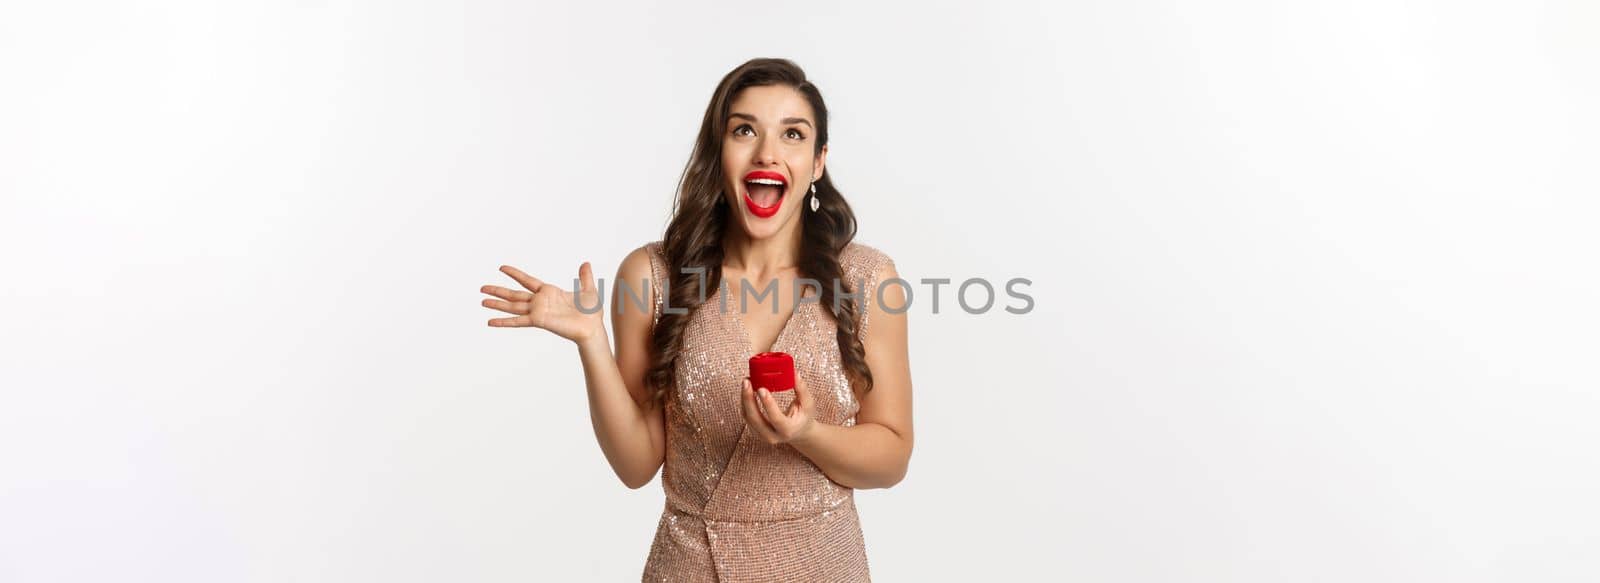 Image of excited woman receiving engagement ring and marriage proposal, scream of joy and happiness, wearing evening dress and red lipstick, standing over white background.